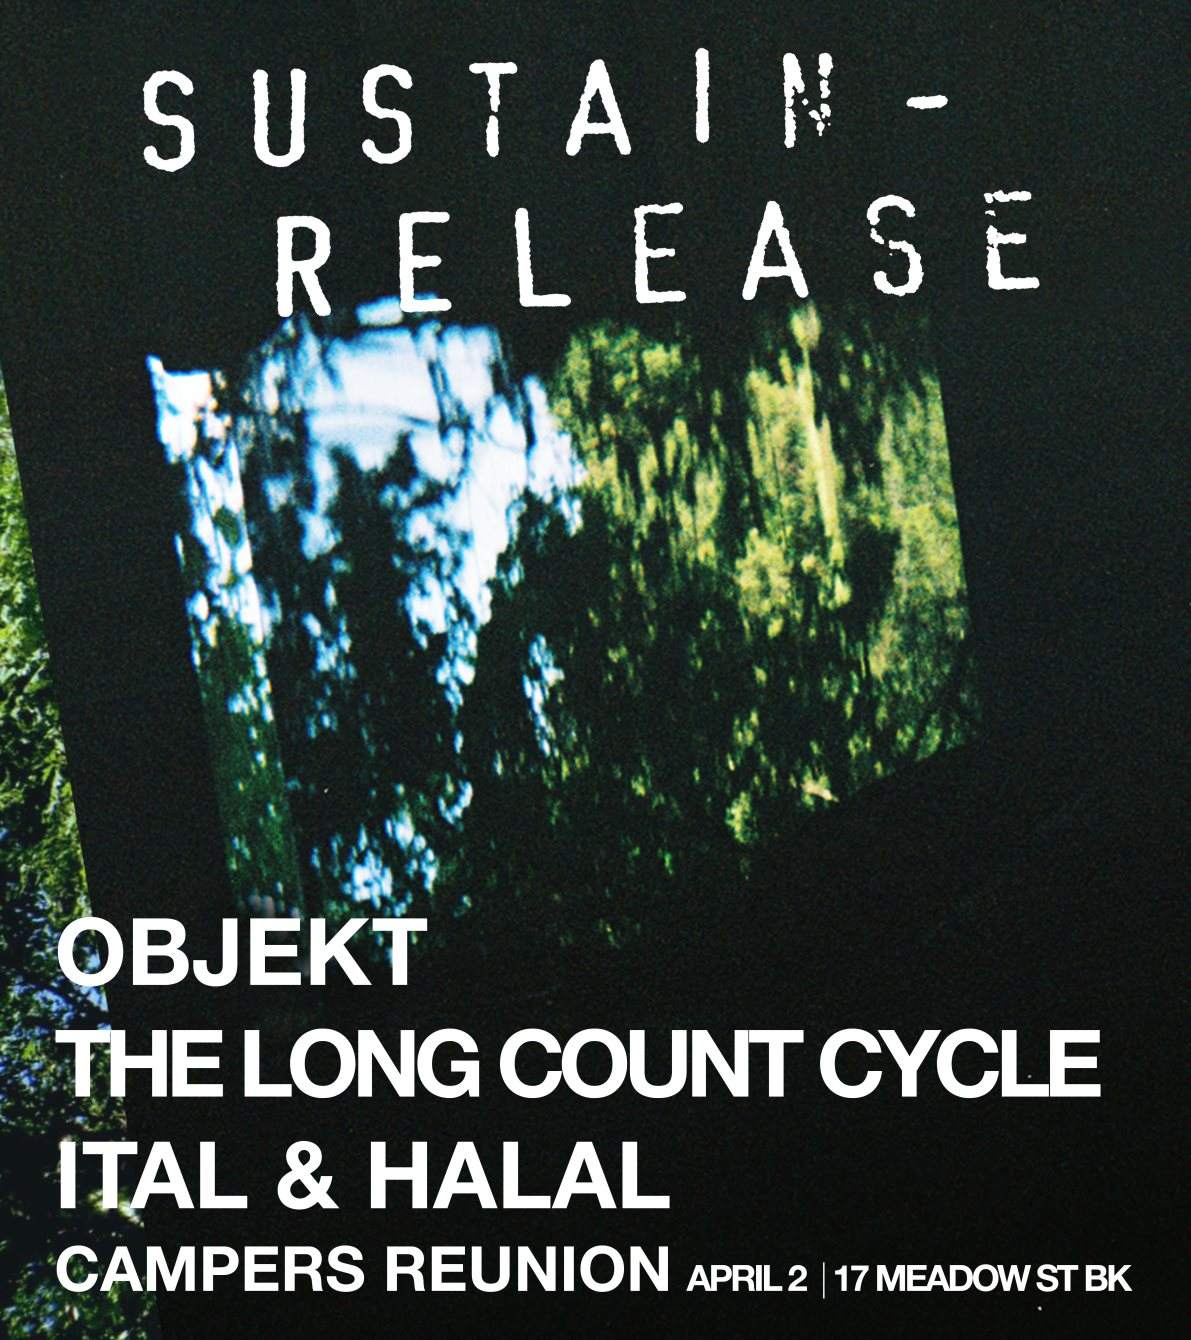 Sustain-Release Campers Reunion: Objekt, The Long Count Cycle, Ital & Halal - Página frontal